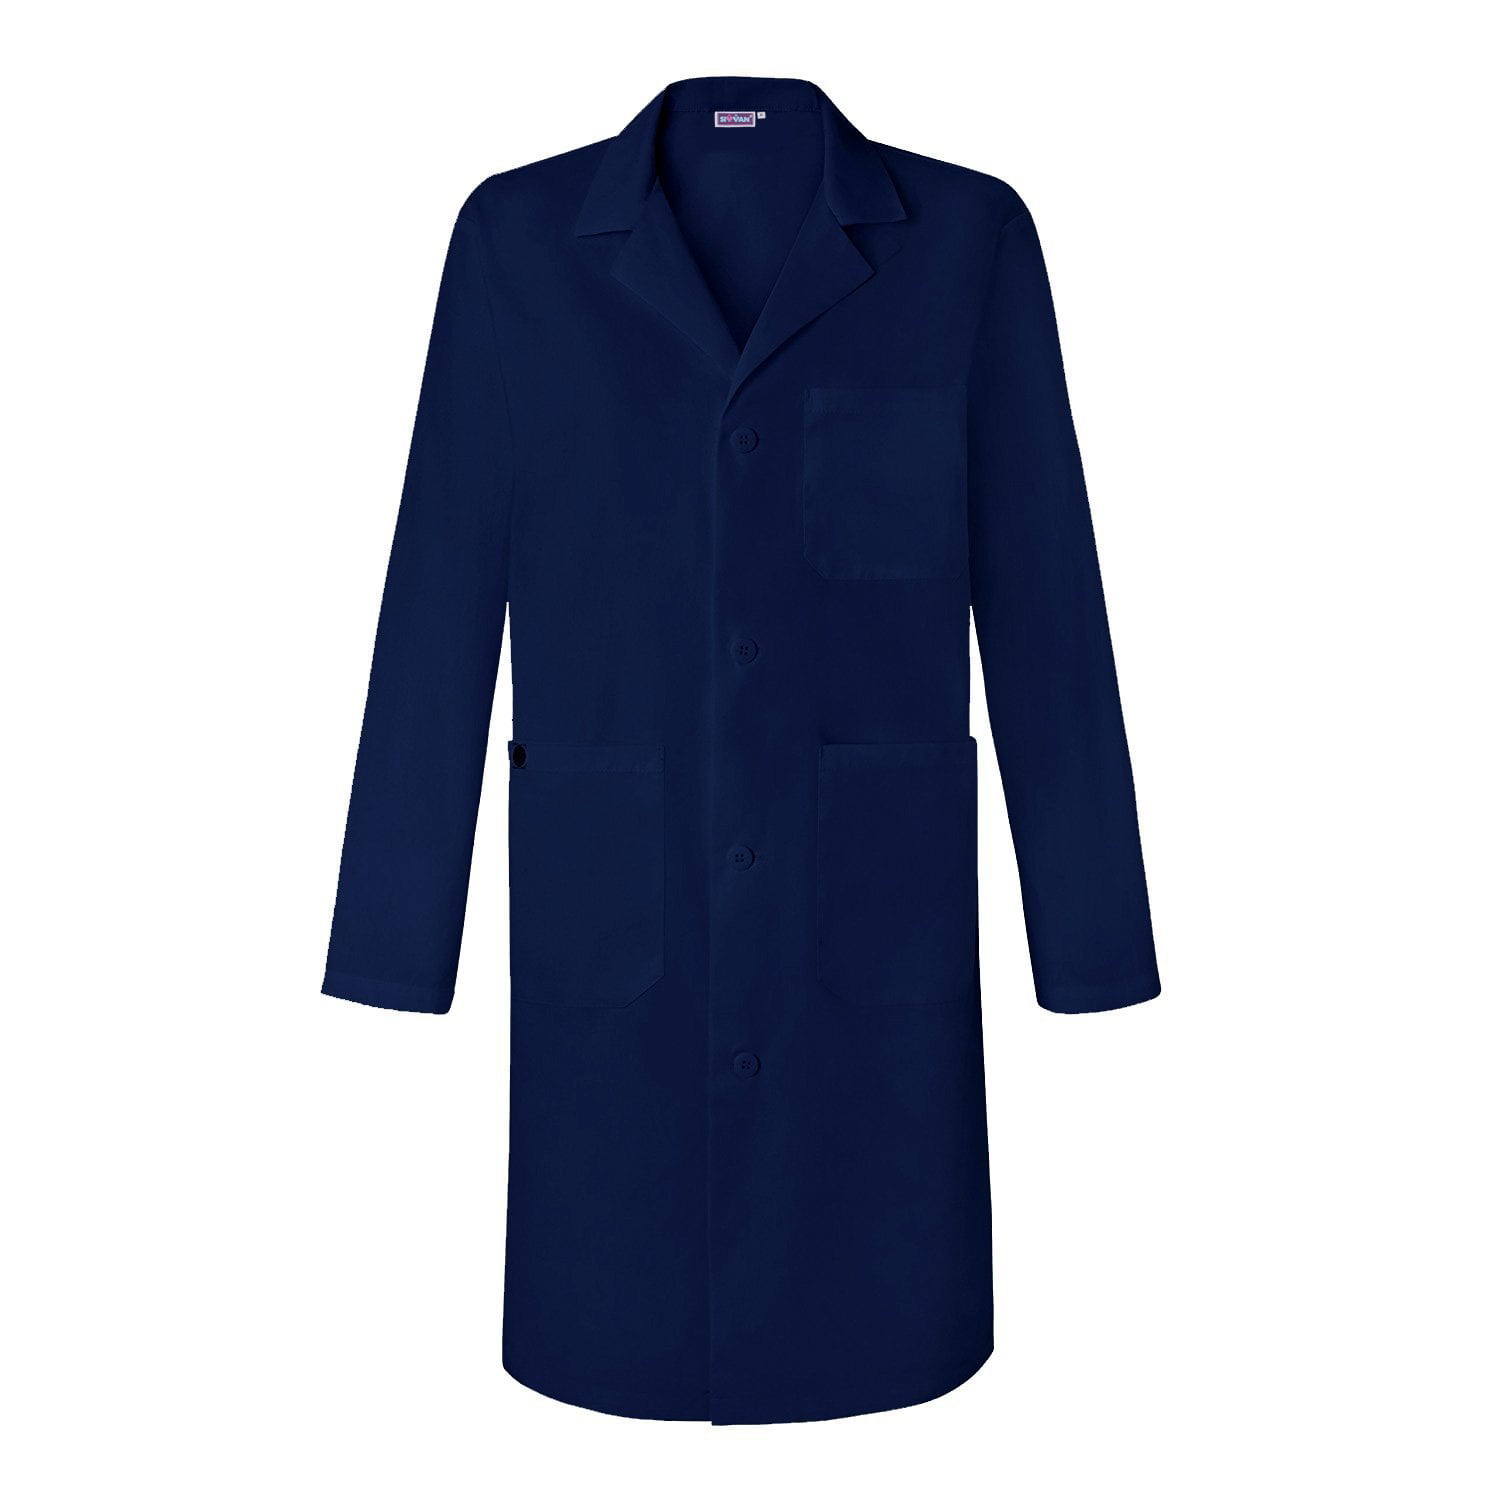 Sivvan Unisex 39 Inch Lab Coat - Back Pleated - S8802 - Navy - L ...